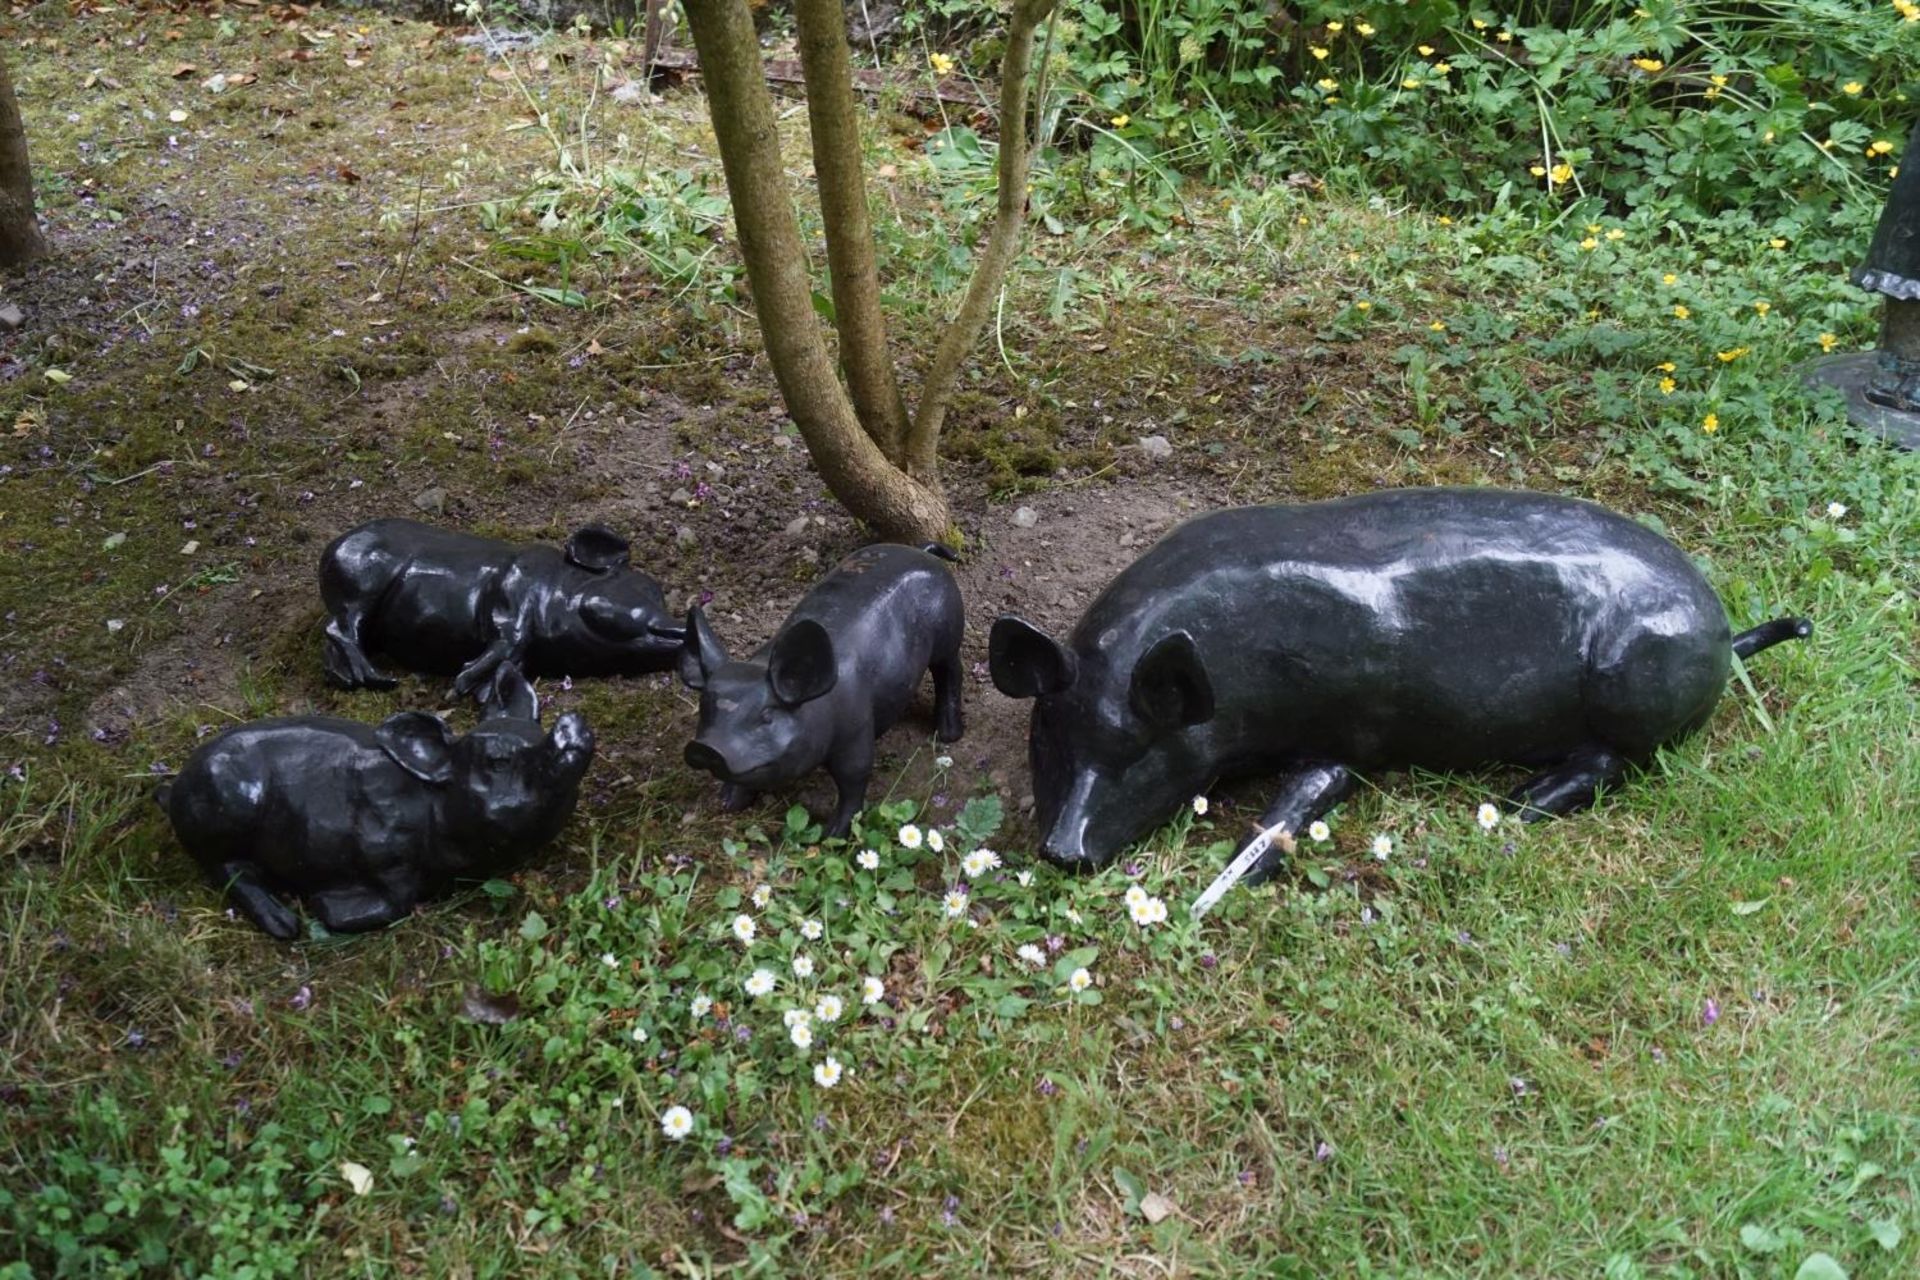 CAST IRON GROUP OF PIGS